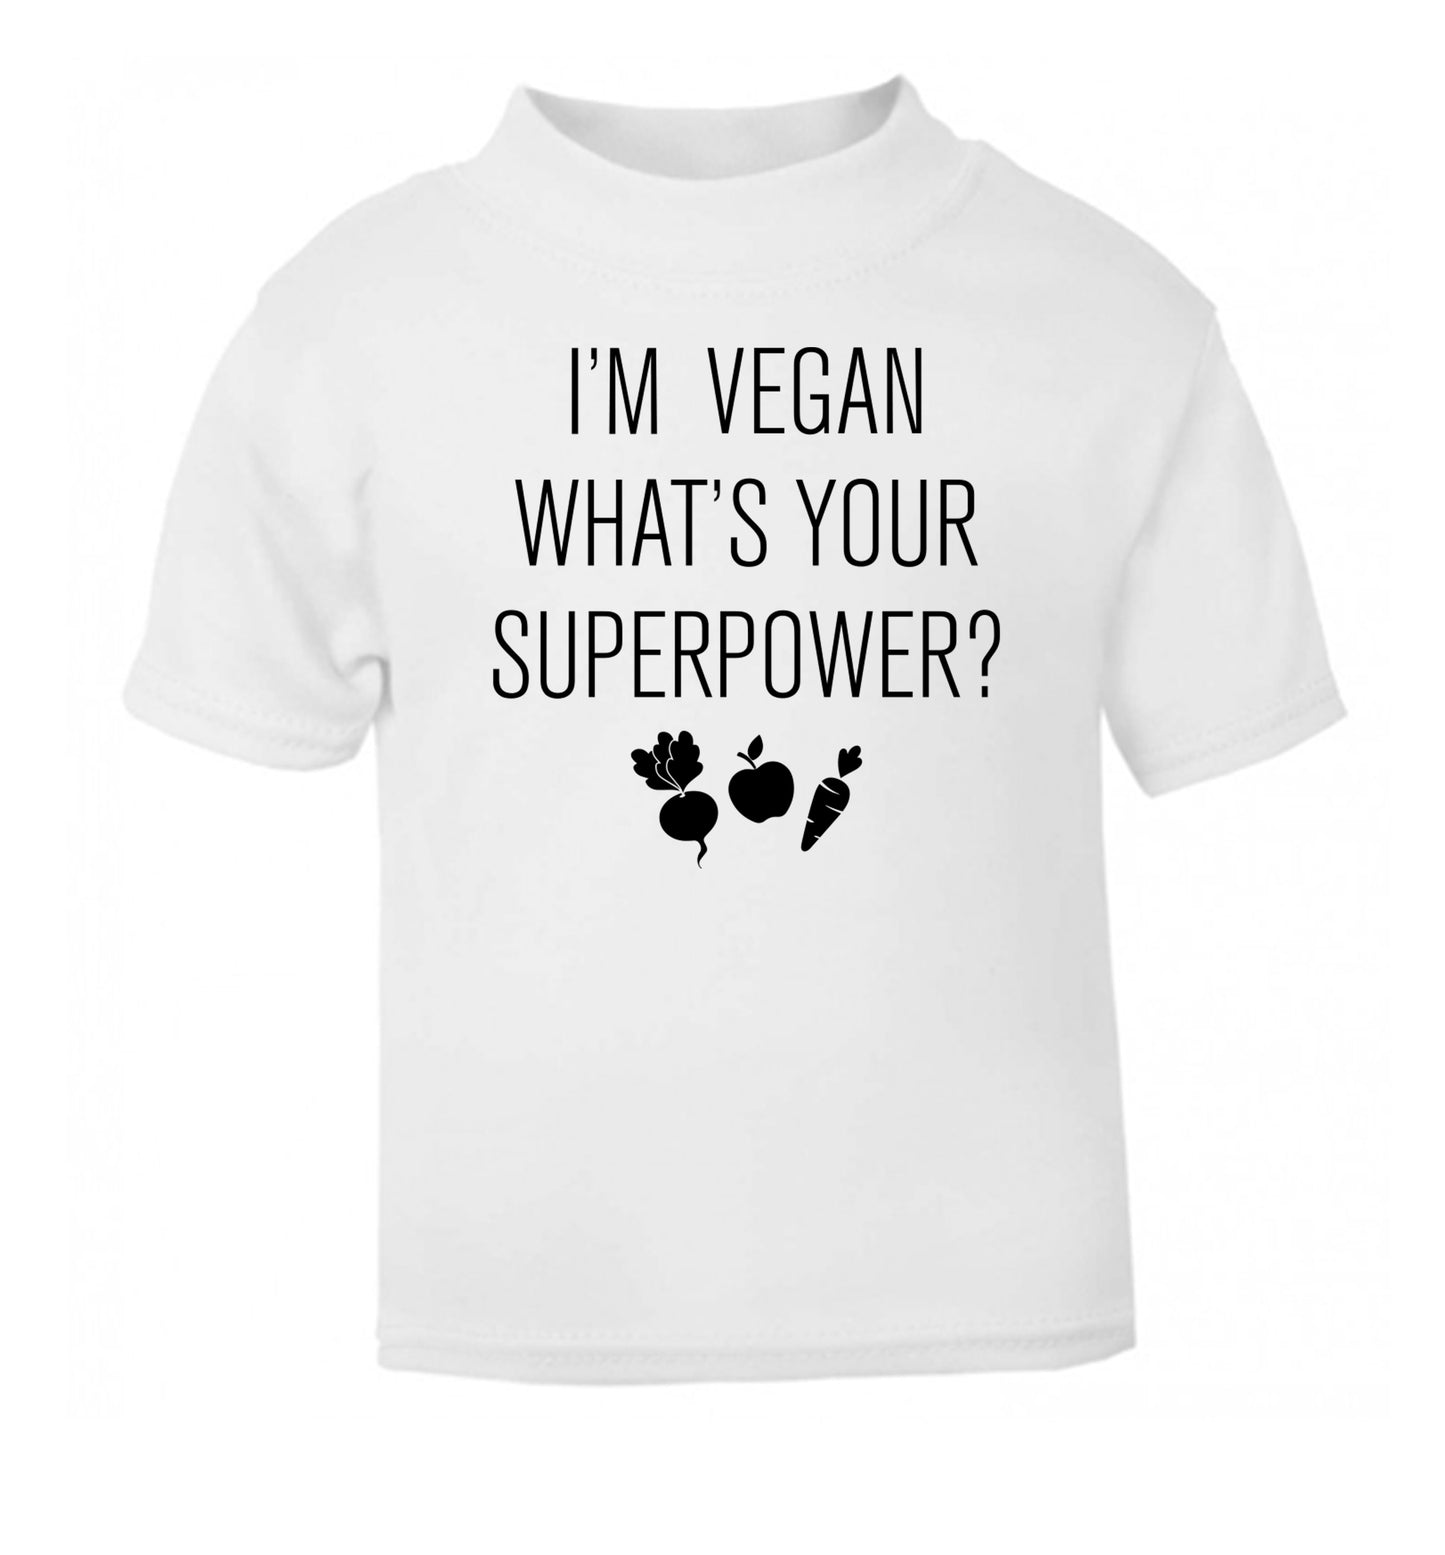 I'm Vegan What's Your Superpower? white Baby Toddler Tshirt 2 Years